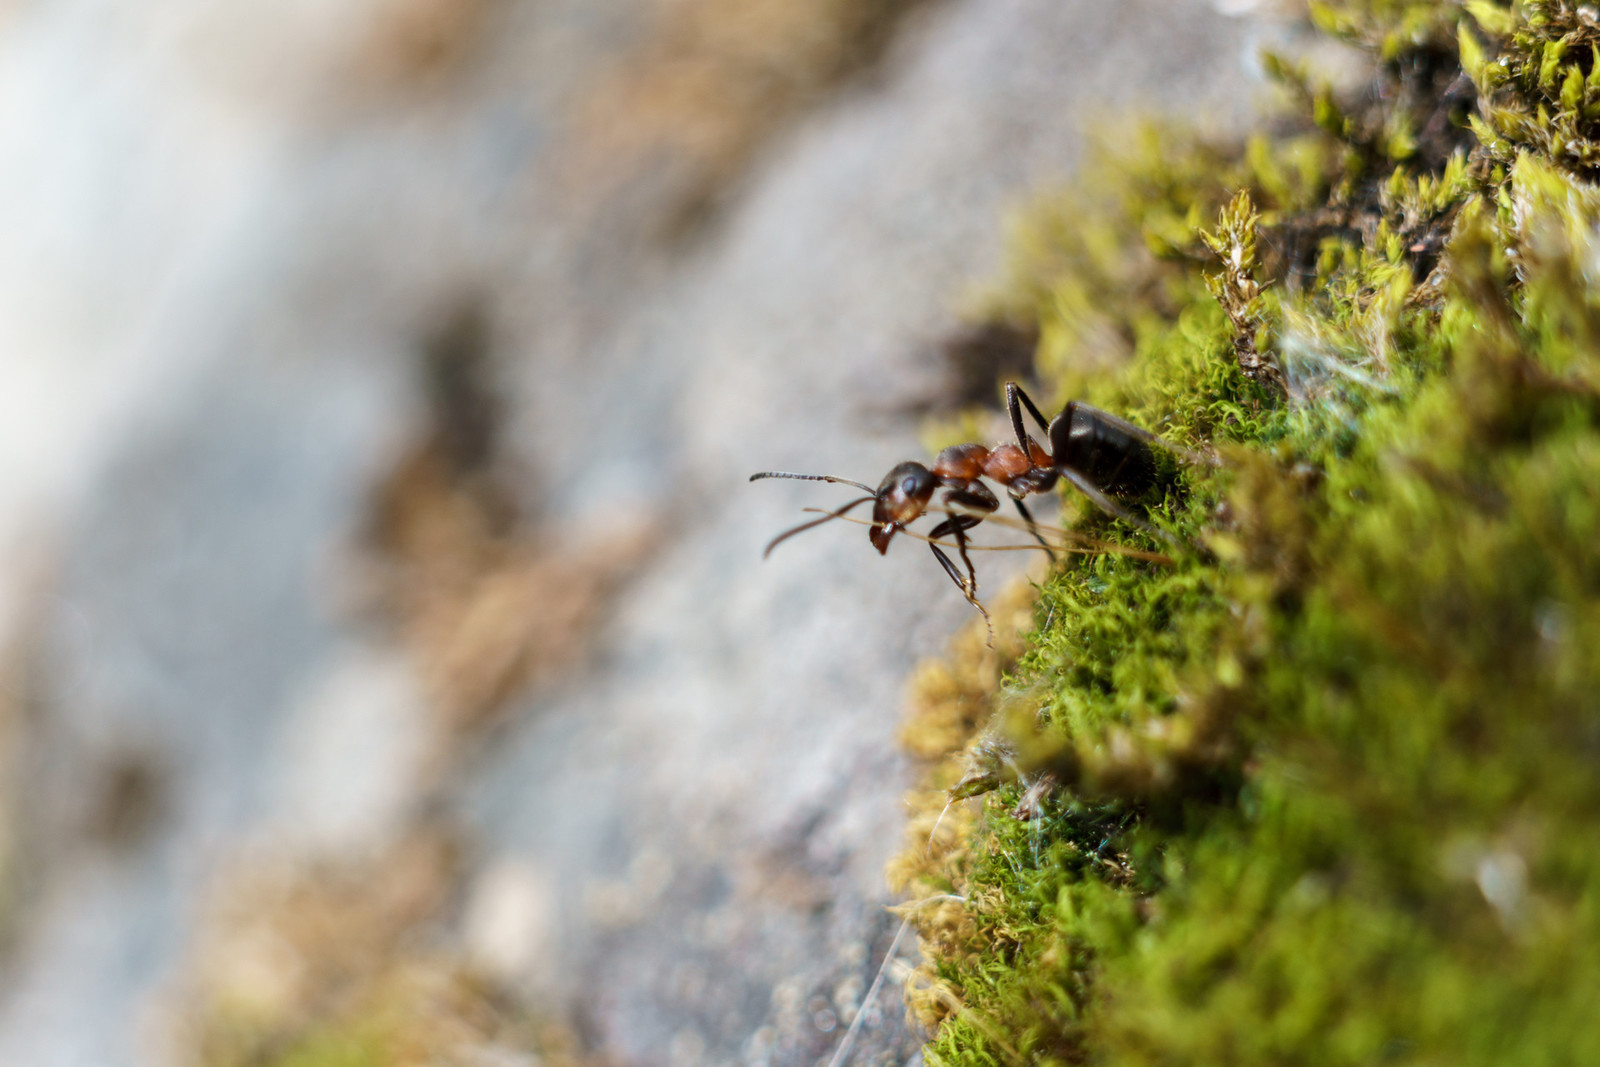 A close-up of an ant